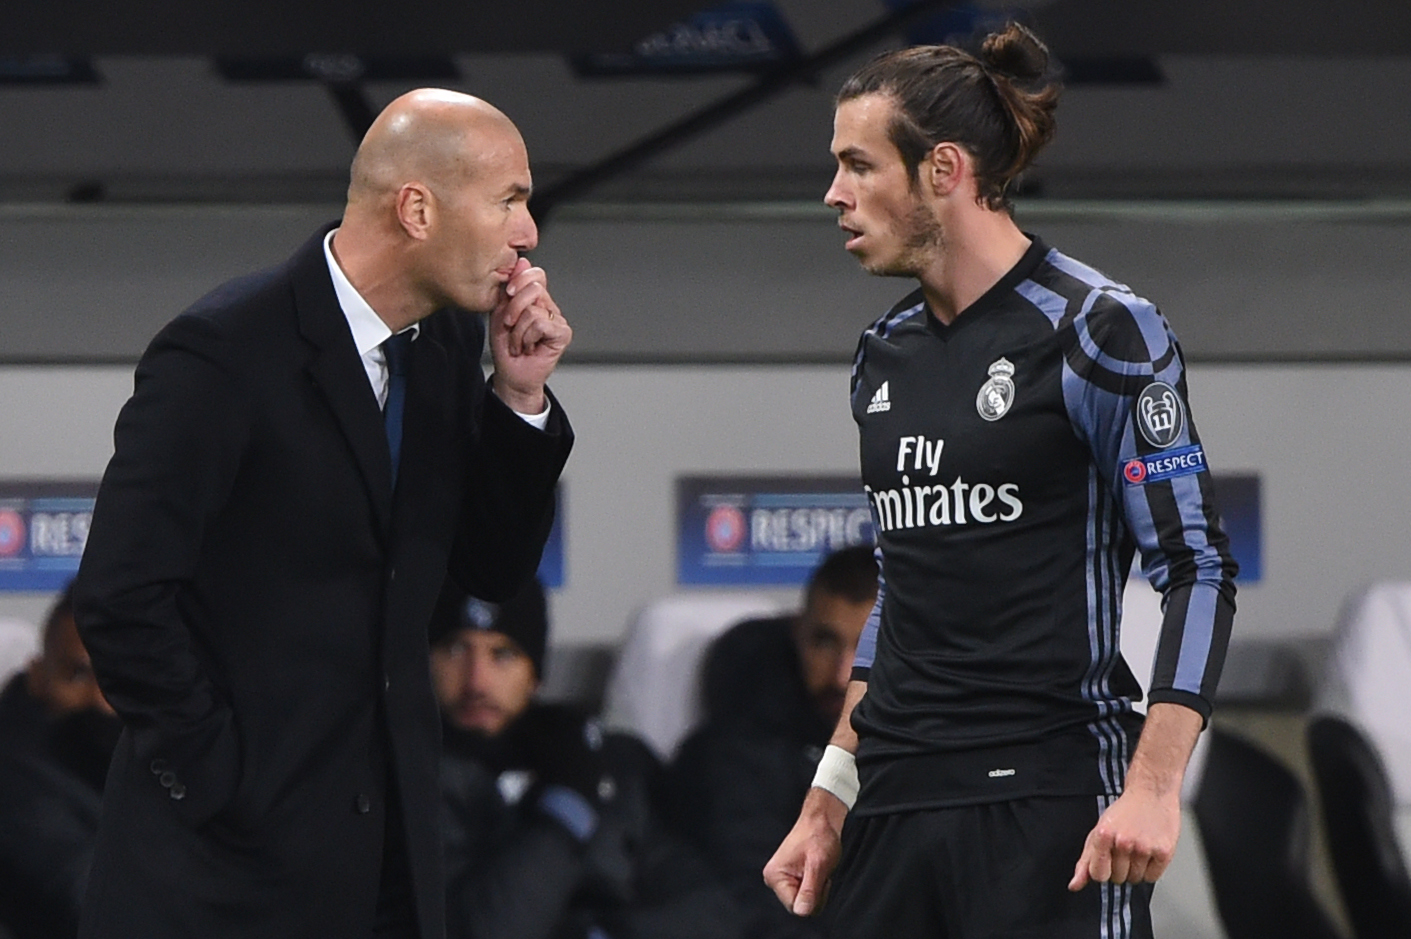 Real Madrid's French coach Zinedine Zidane (L) gives instructions to Real Madrid's Welsh forward Gareth Bale during the UEFA Champions League group F football match Legia Warsaw vs Real Madrid CF in Warsaw, Poland on November 2, 2016. / AFP / Janek SKARZYNSKI        (Photo credit should read JANEK SKARZYNSKI/AFP/Getty Images)